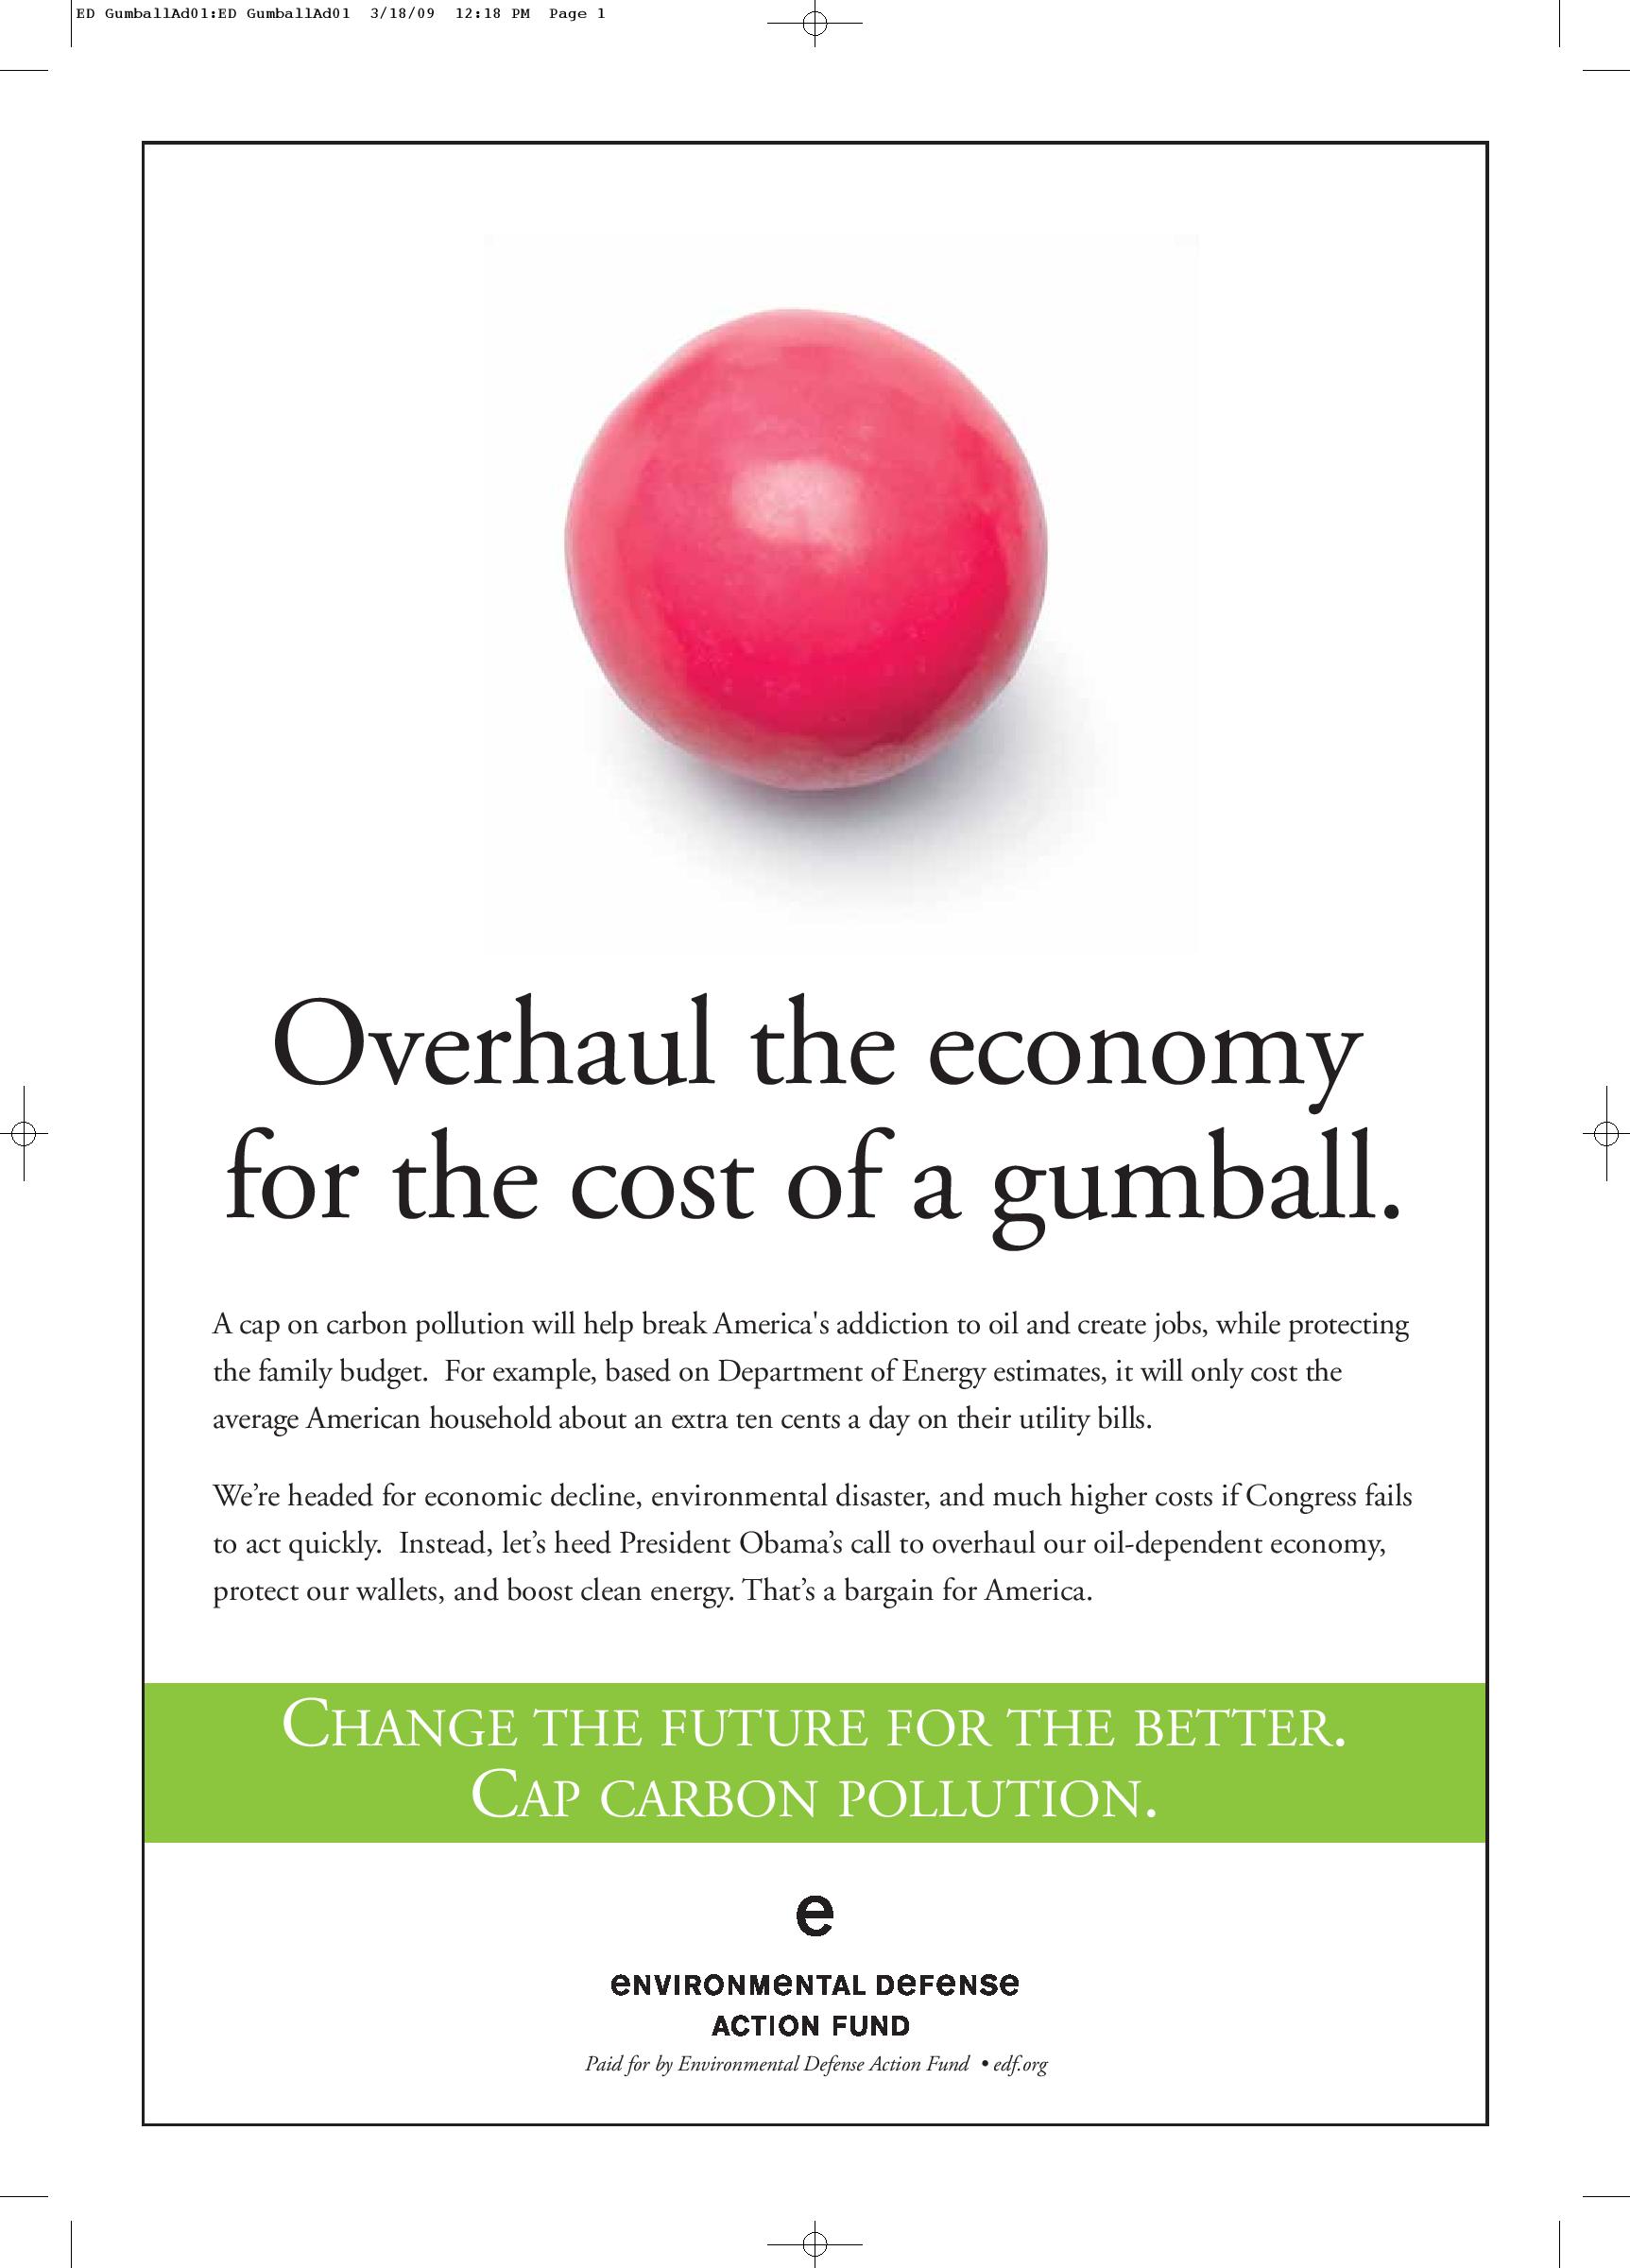 Overhaul the economy for the cost of a gumball